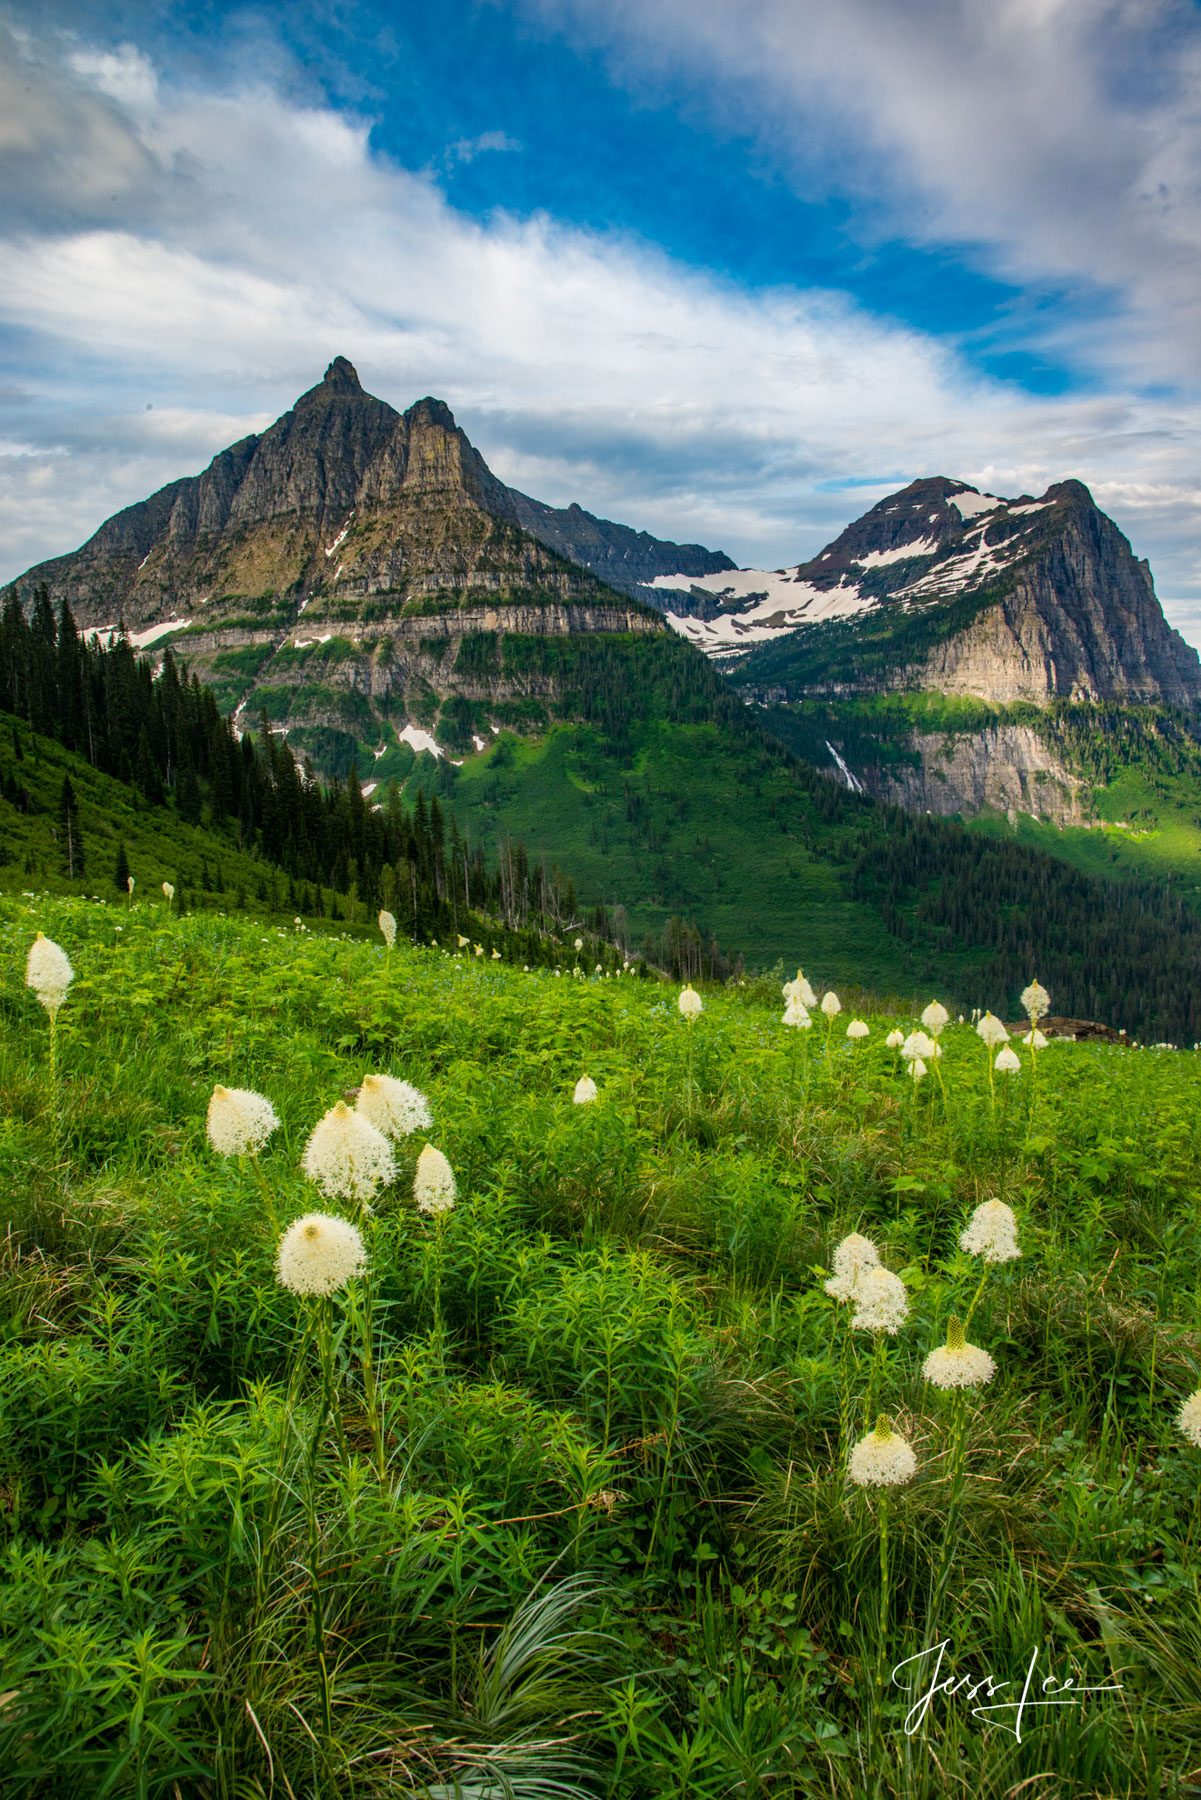 Limited Edition of 50 Exclusive high-resolution Museum Quality Fine Art Prints of Bear Grass Vertical Landscapes. Photos copyright...